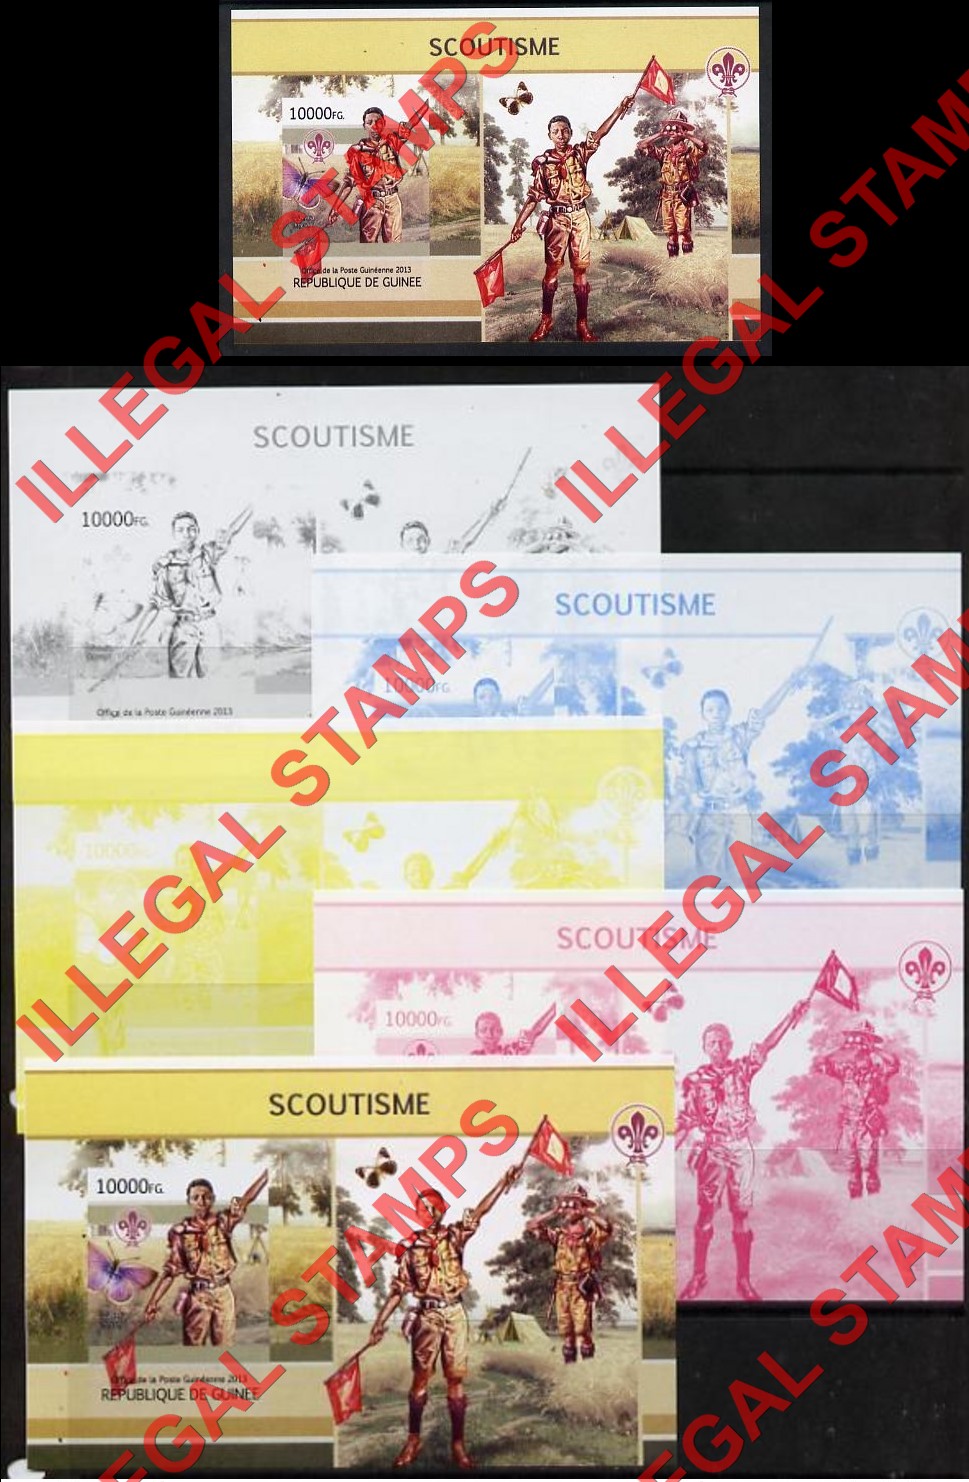 Guinea Republic 2013 Scouting Scoutisme Counterfeit Illegal Stamp with Matching Color Proofs (Set 1)